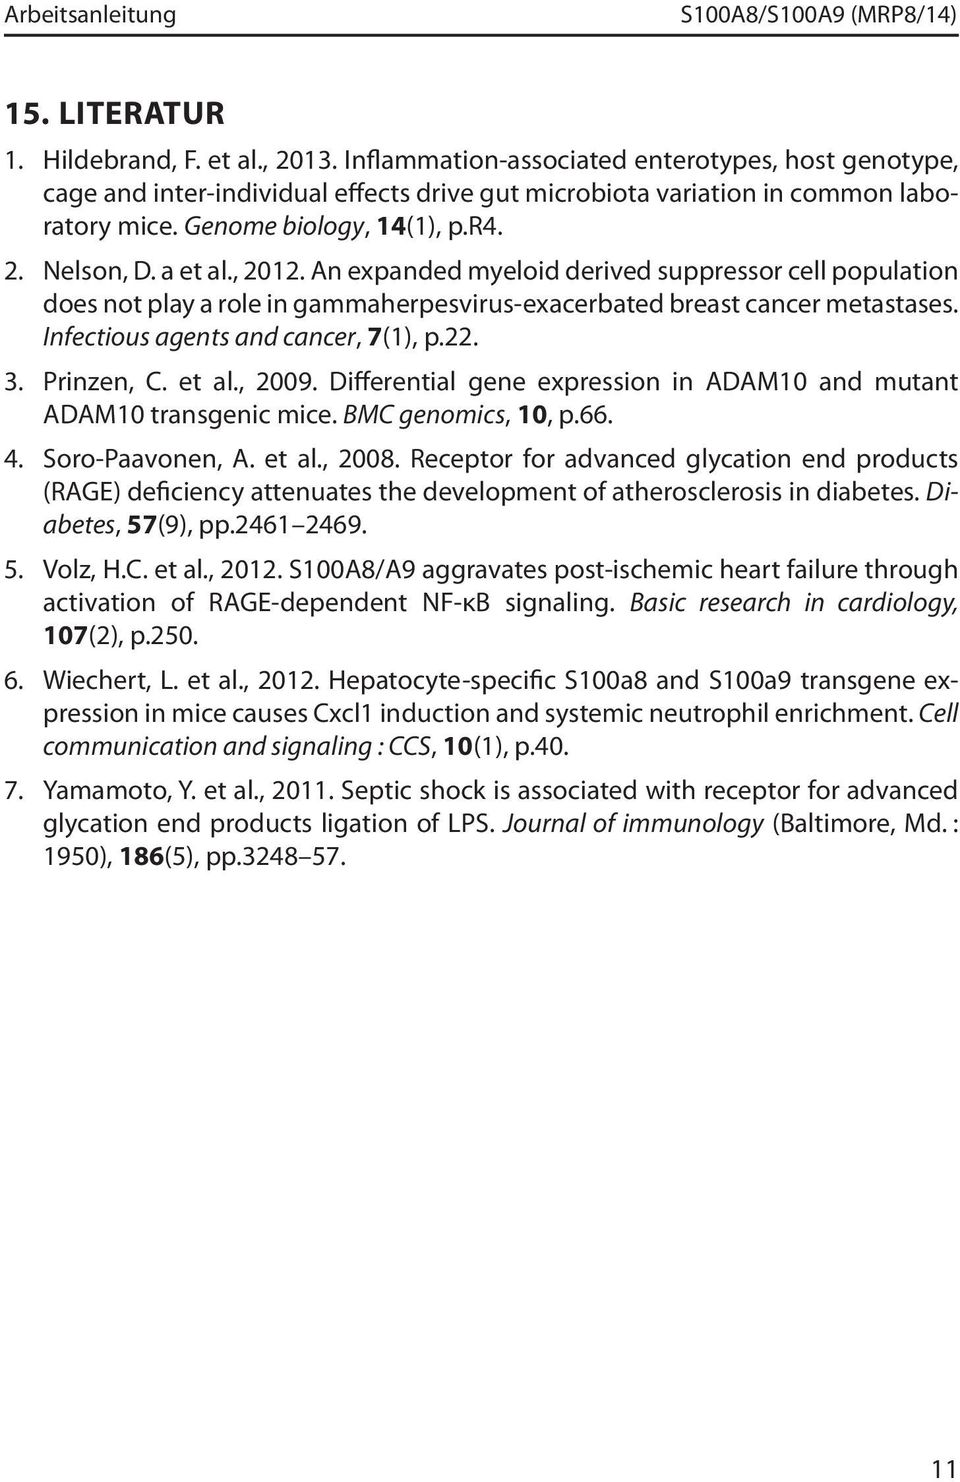 , 2012. An expanded myeloid derived suppressor cell population does not play a role in gammaherpesvirus-exacerbated breast cancer metastases. Infectious agents and cancer, 7(1), p.22. 3. Prinzen, C.